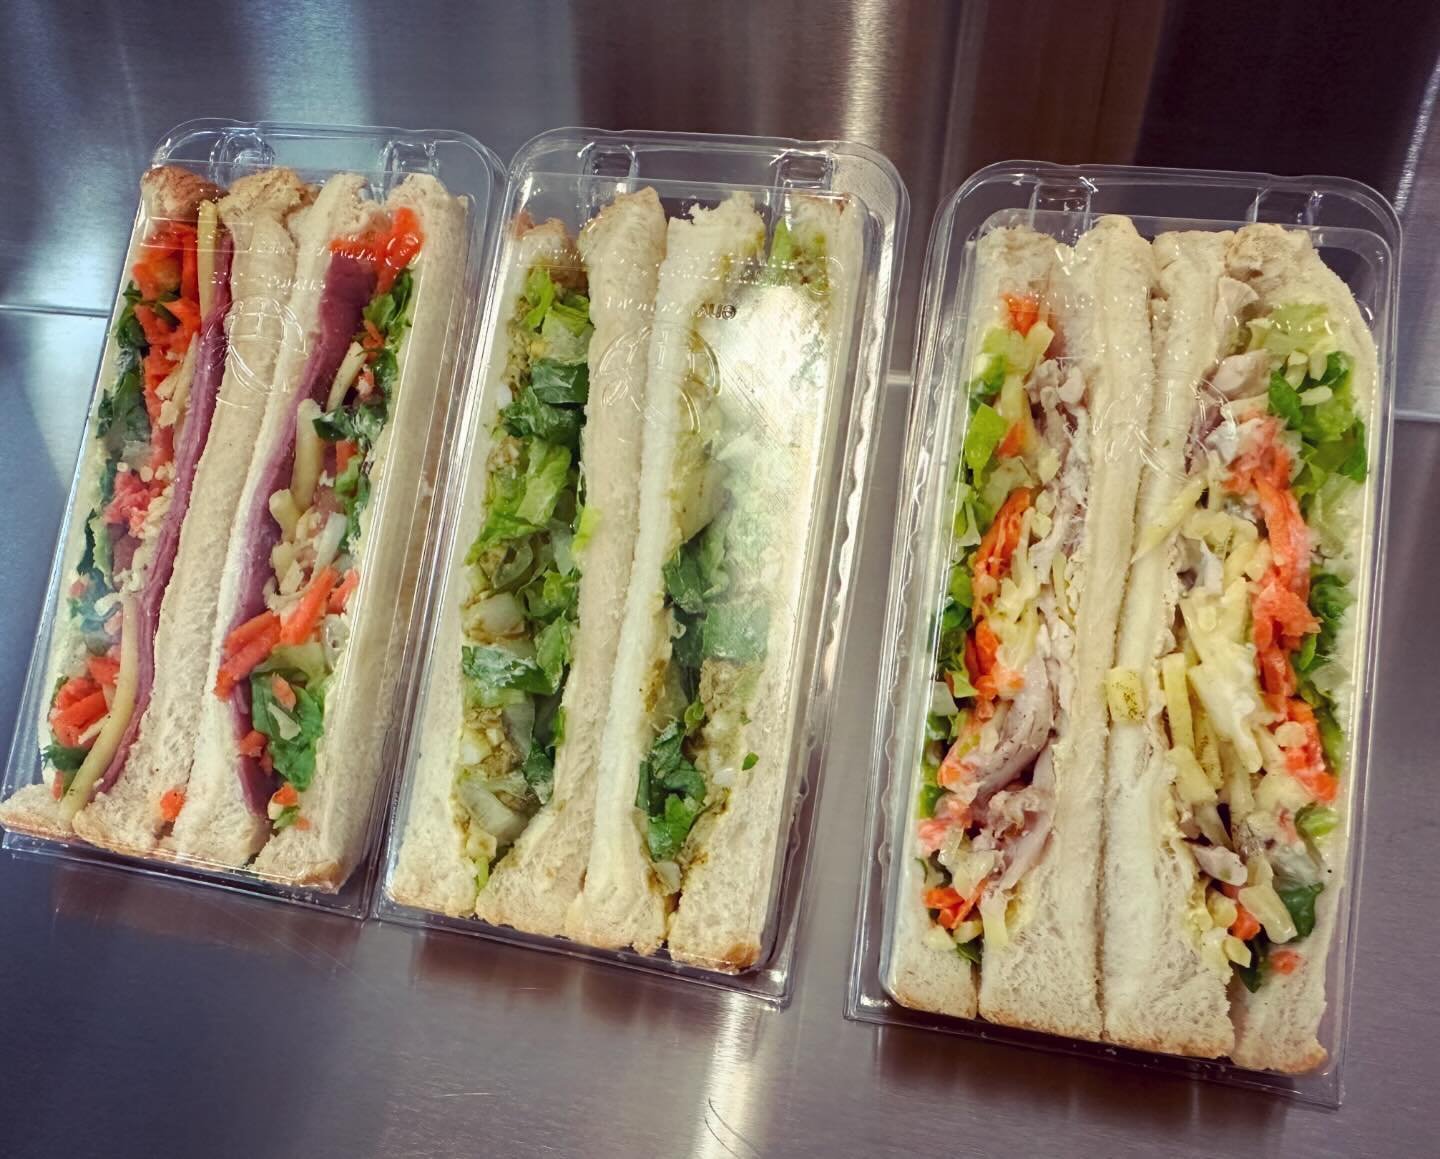 Looking for a quick, delicious and affordable lunch? Drop in to Valentino&rsquo;s on Lockyer Ave, we have freshly made sandwiches, rolls and wraps Monday-Friday!! Using fresh, local ingredients including real, roast chicken and freshly baked bread da